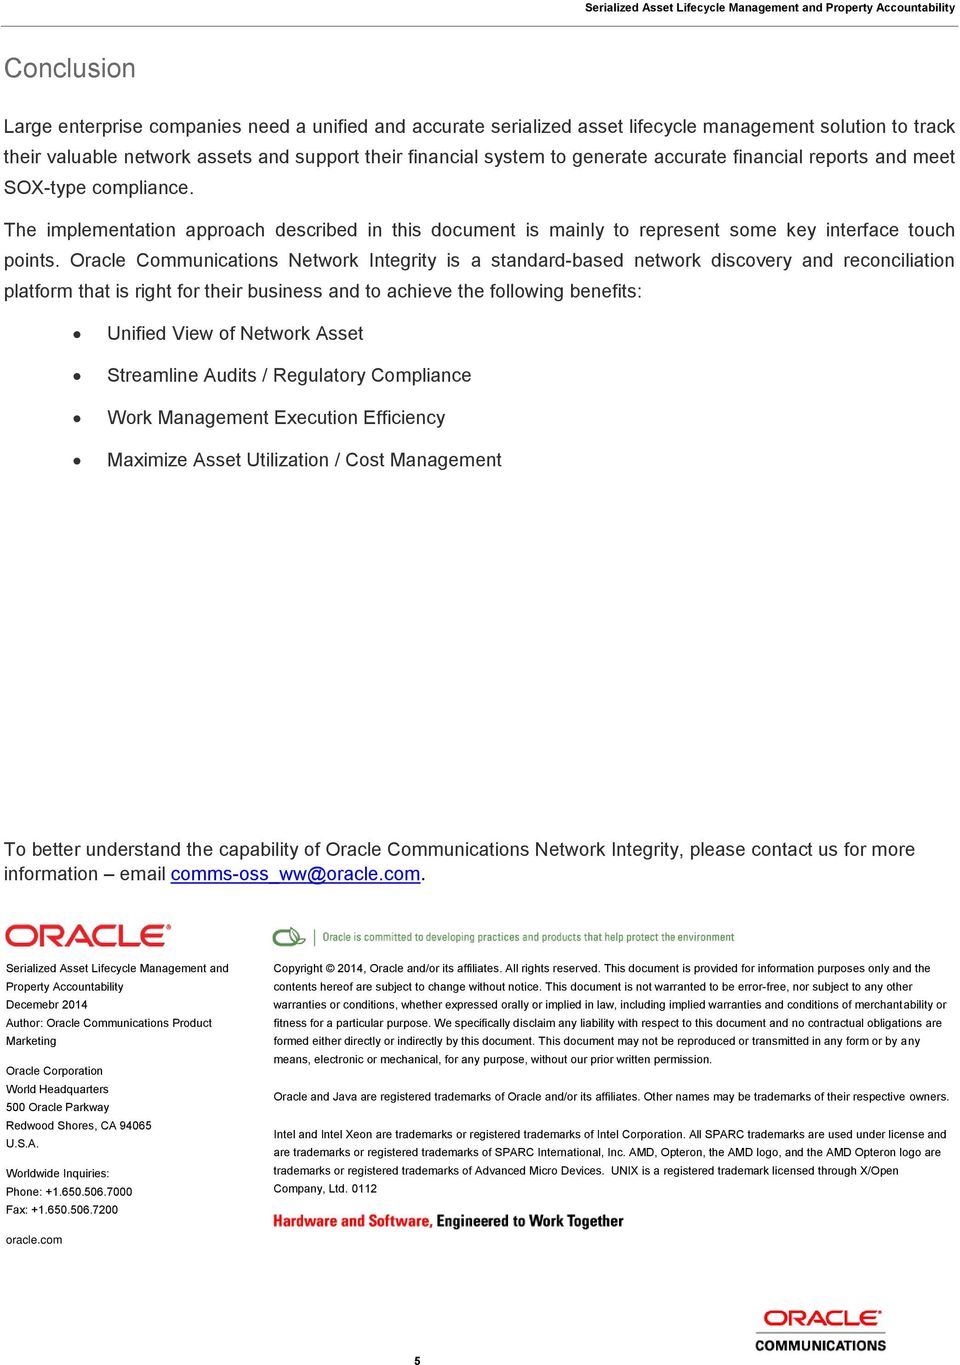 Oracle Communications Network Integrity is a standard-based network discovery and reconciliation platform that is right for their business and to achieve the following benefits: Unified View of